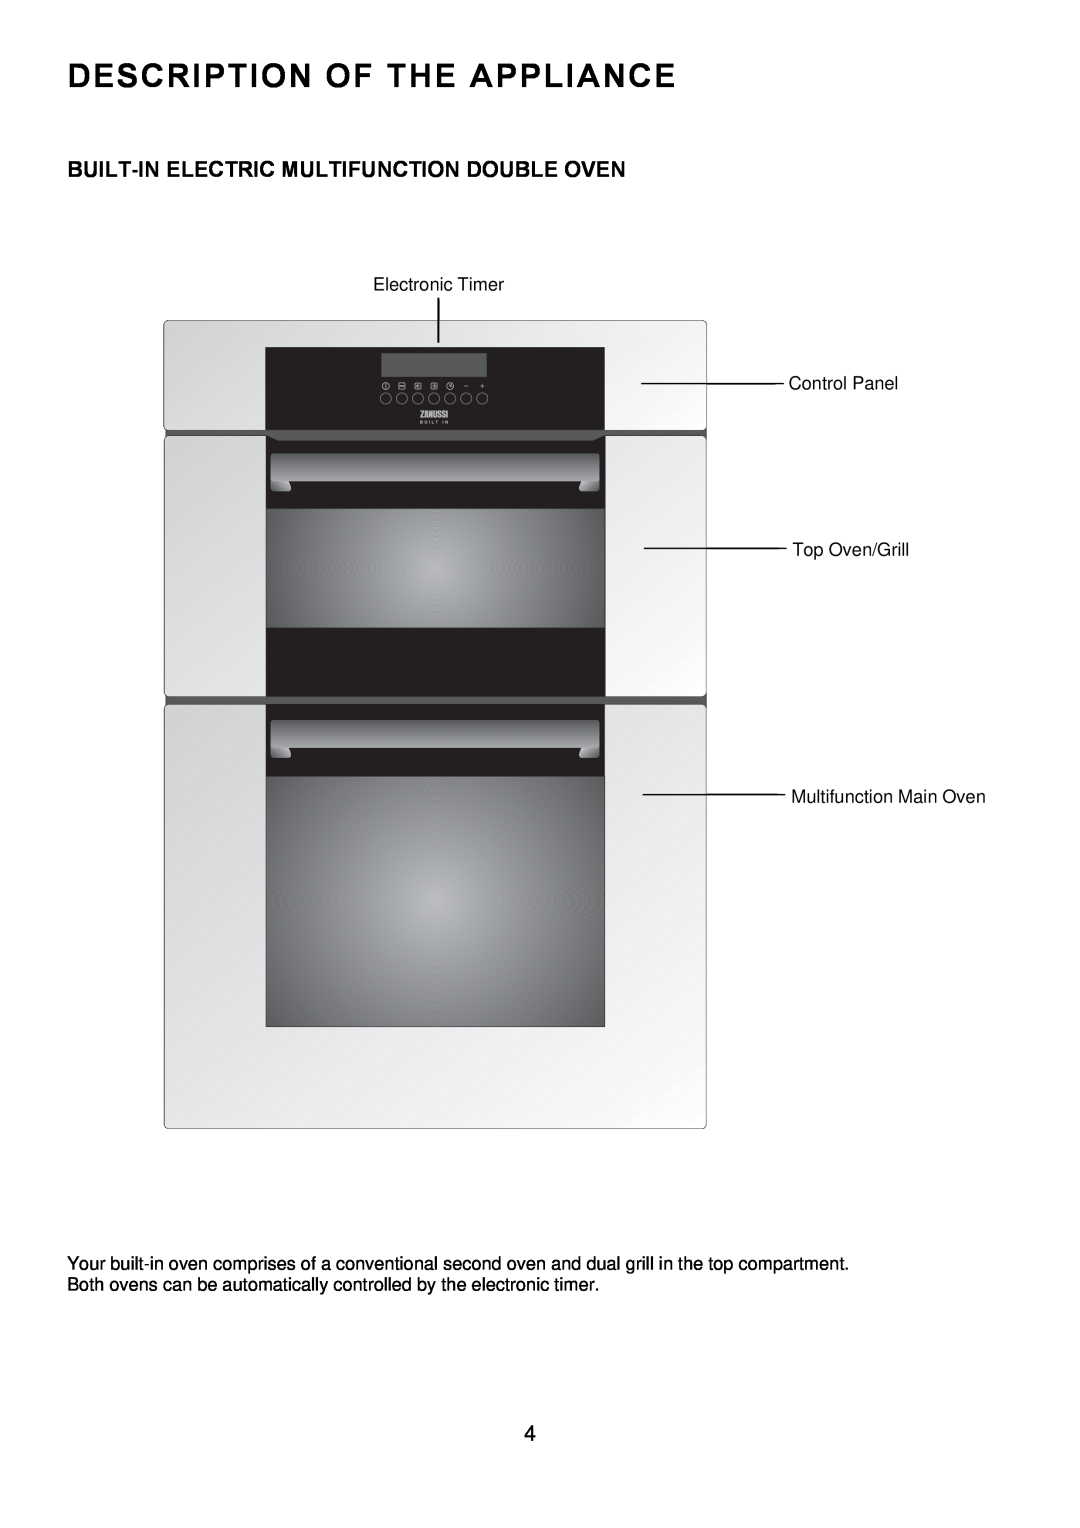 Zanussi ZDQ 995 manual Description Of The Appliance, Built-In Electric Multifunction Double Oven 